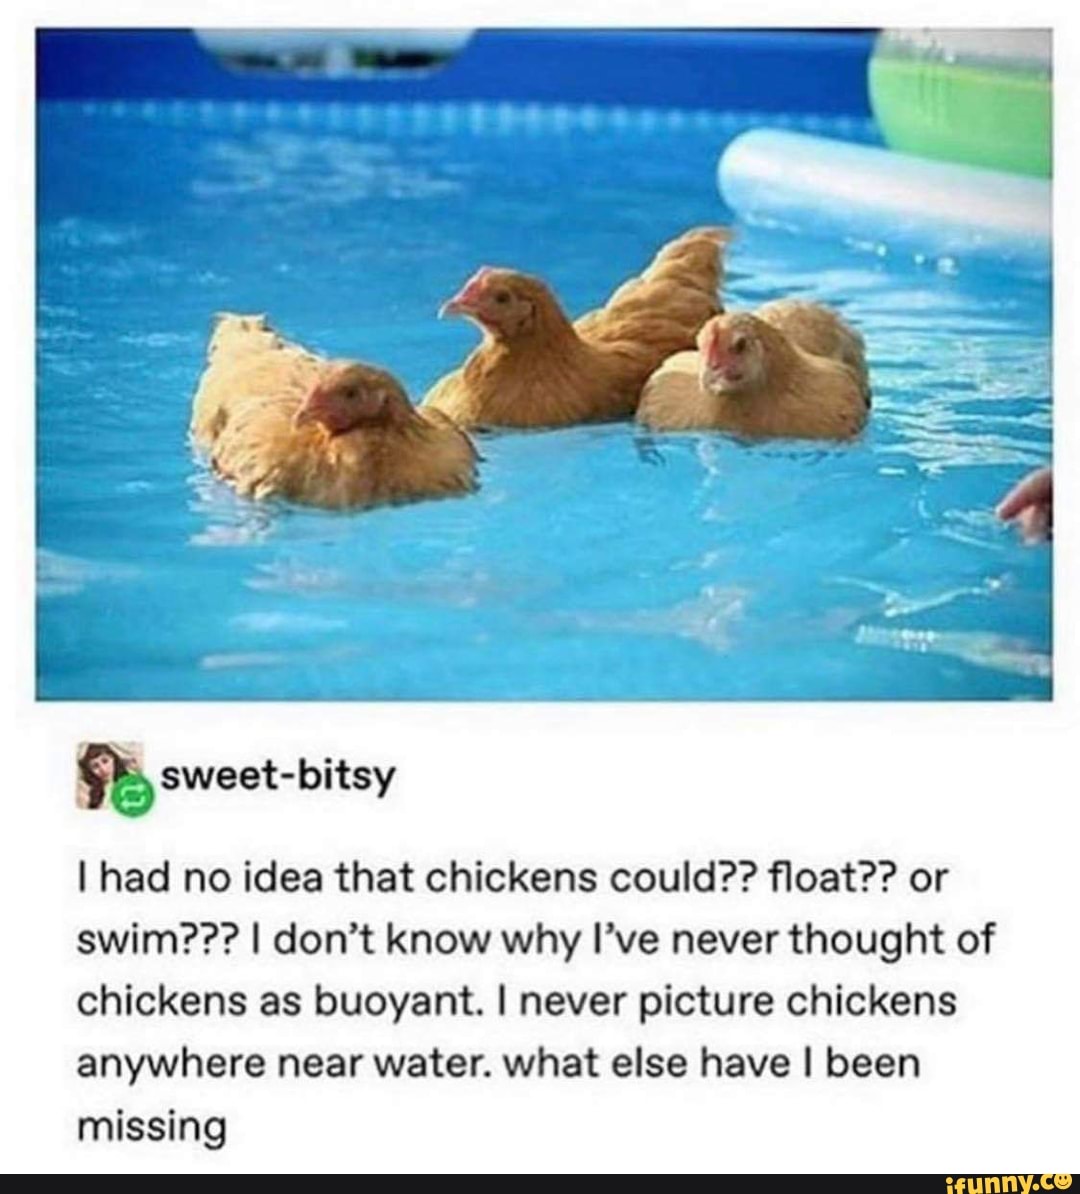 grilled chicken thoughts